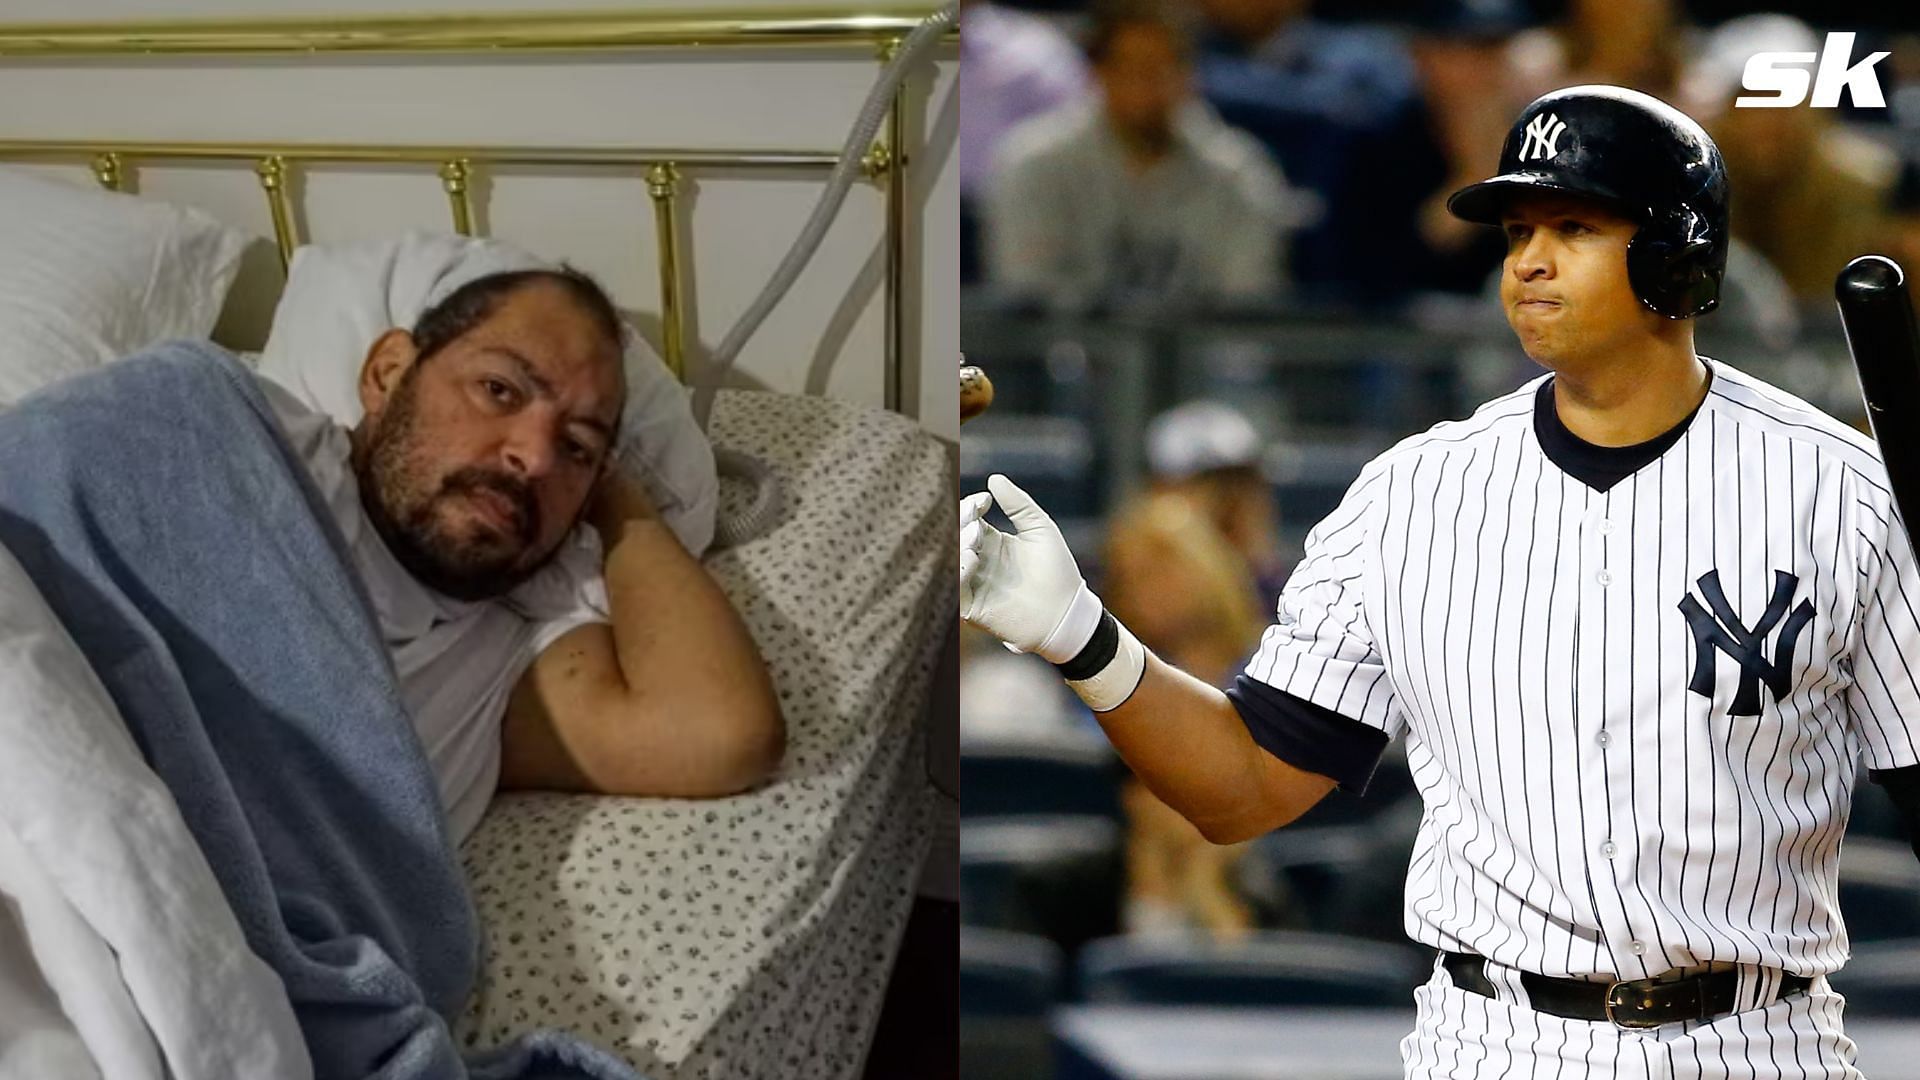 Yuri Sucart is a cousin of Alex Rodriguez who played a central role in the Biogensis scandal